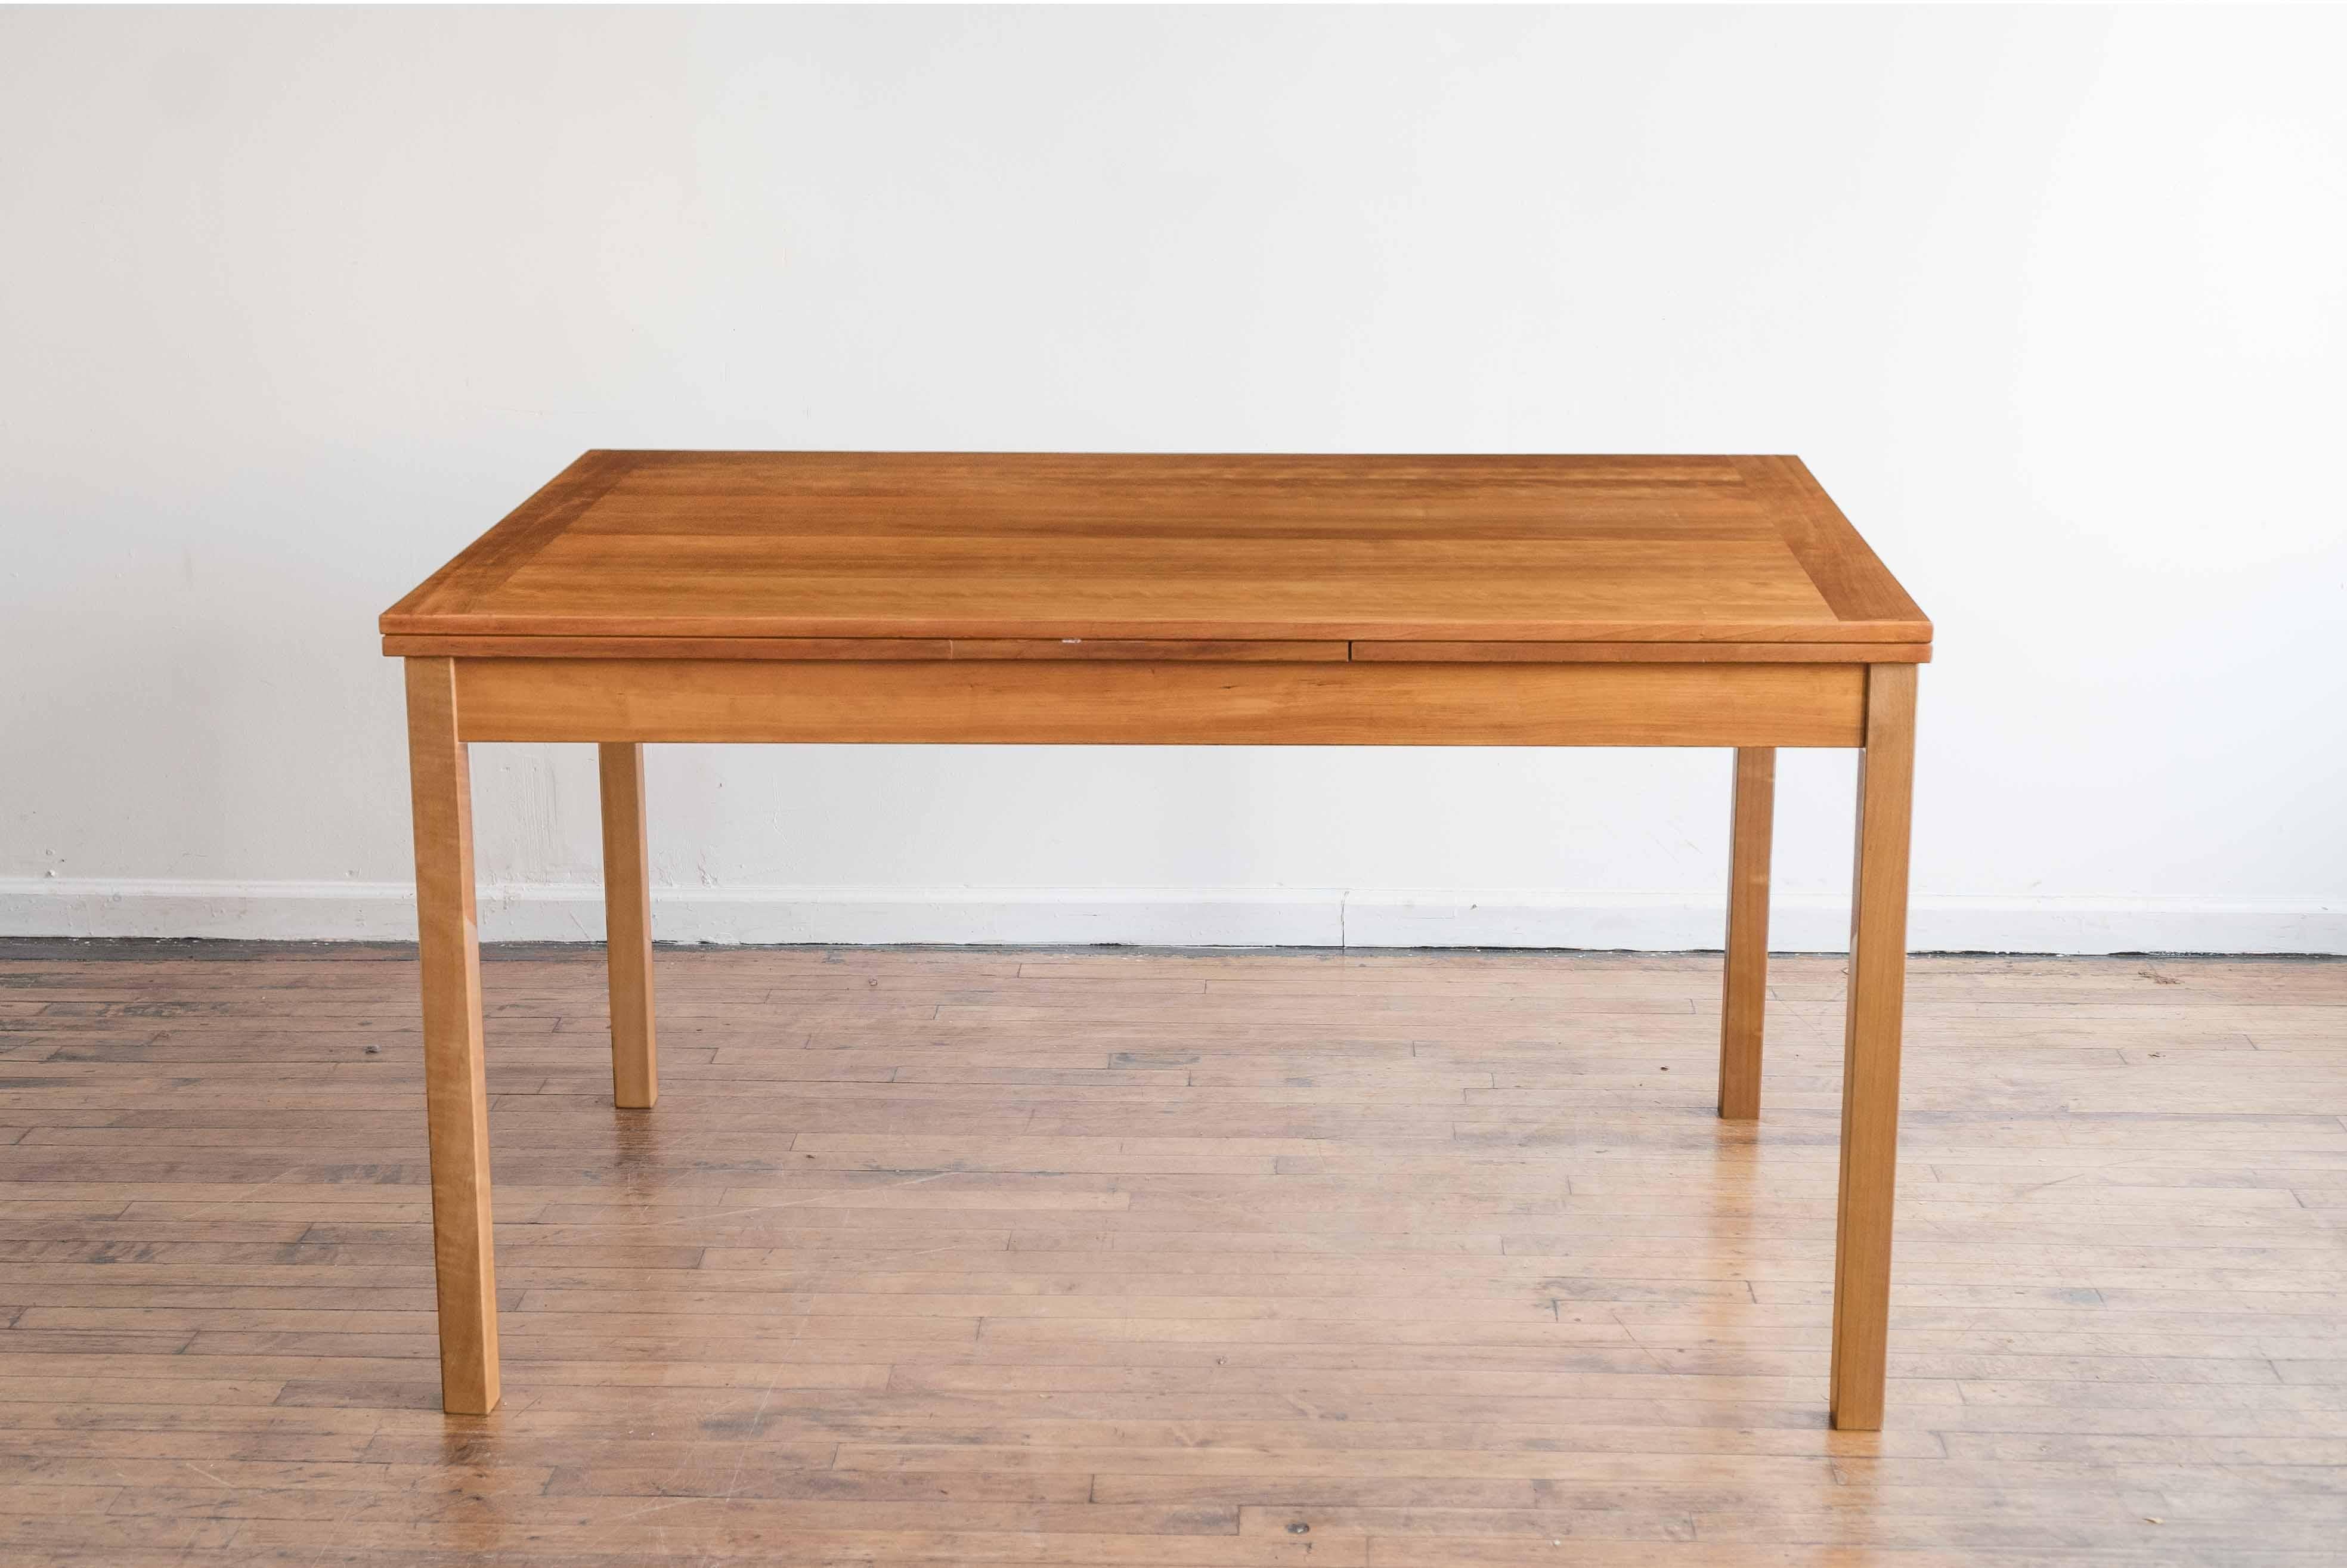 53” x 35.5” x 30”H; each leaf adds 19.5”; table clearance 25.5

Maple draw leaf dining table from Denmark. Seats 6 without leaves, or 10 with the leaves extended. 

Very good restored condition. 

Please inquire for shipping rates. 

